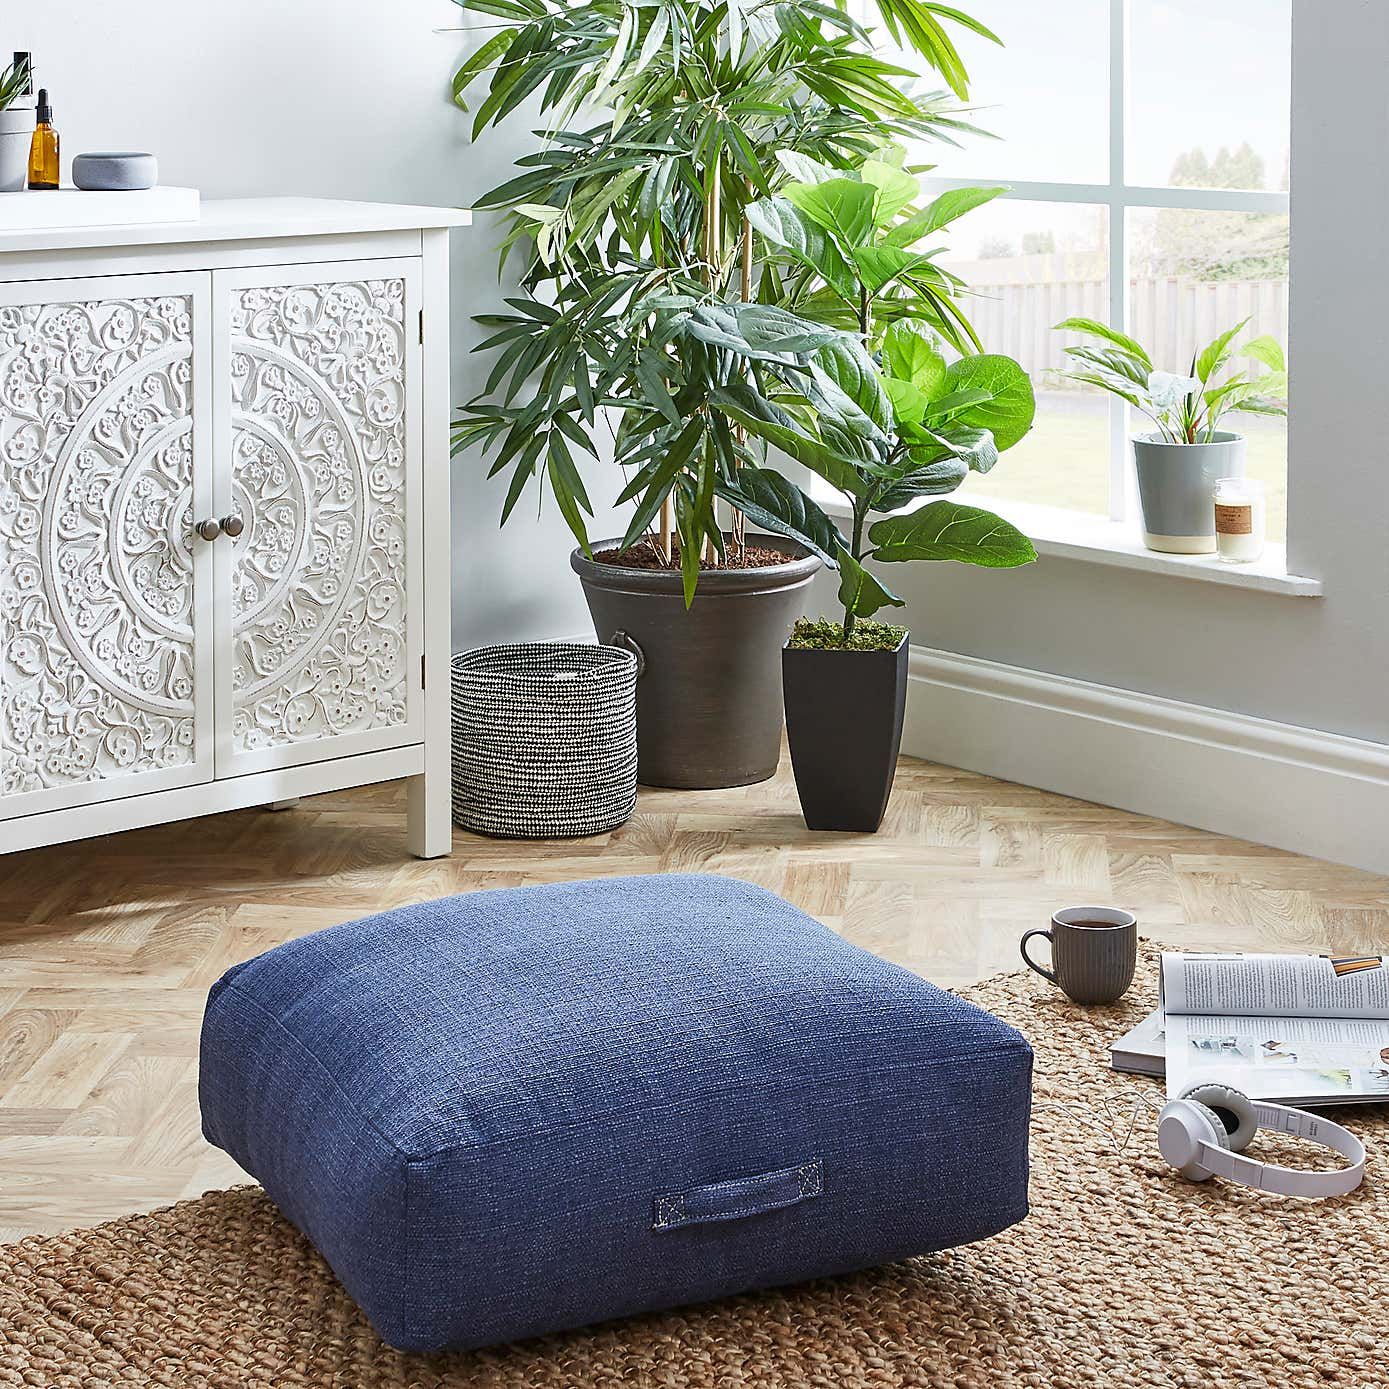 How To Make Large Rectangle Floor Cushion Online